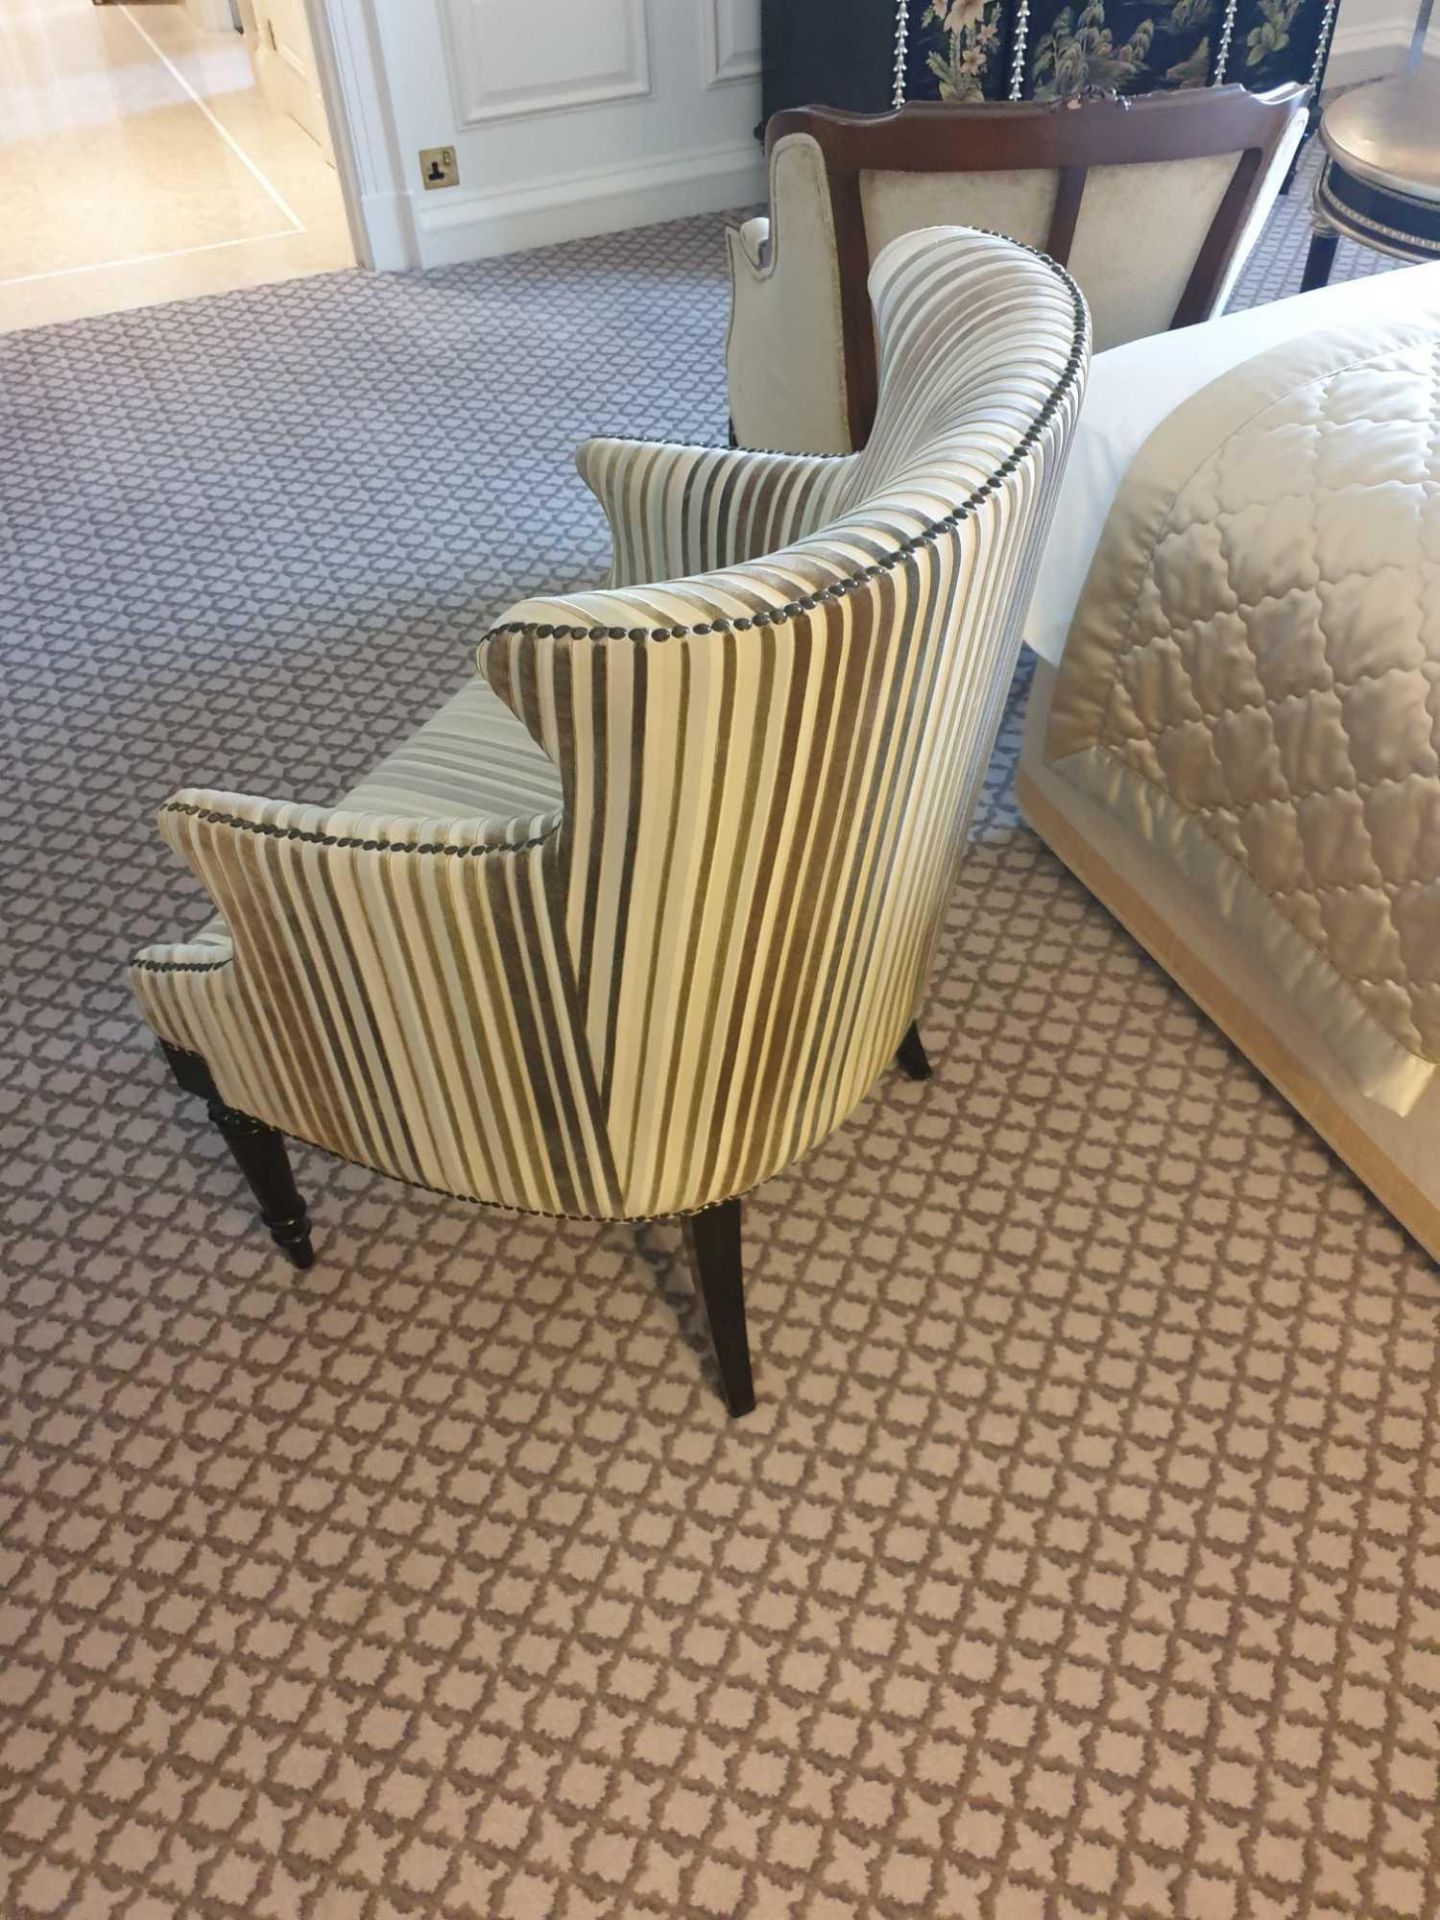 Accent Chair In Upholstered Striped Fabric 65 x 49 x 84cm (Room 702 & 703) - Image 2 of 3